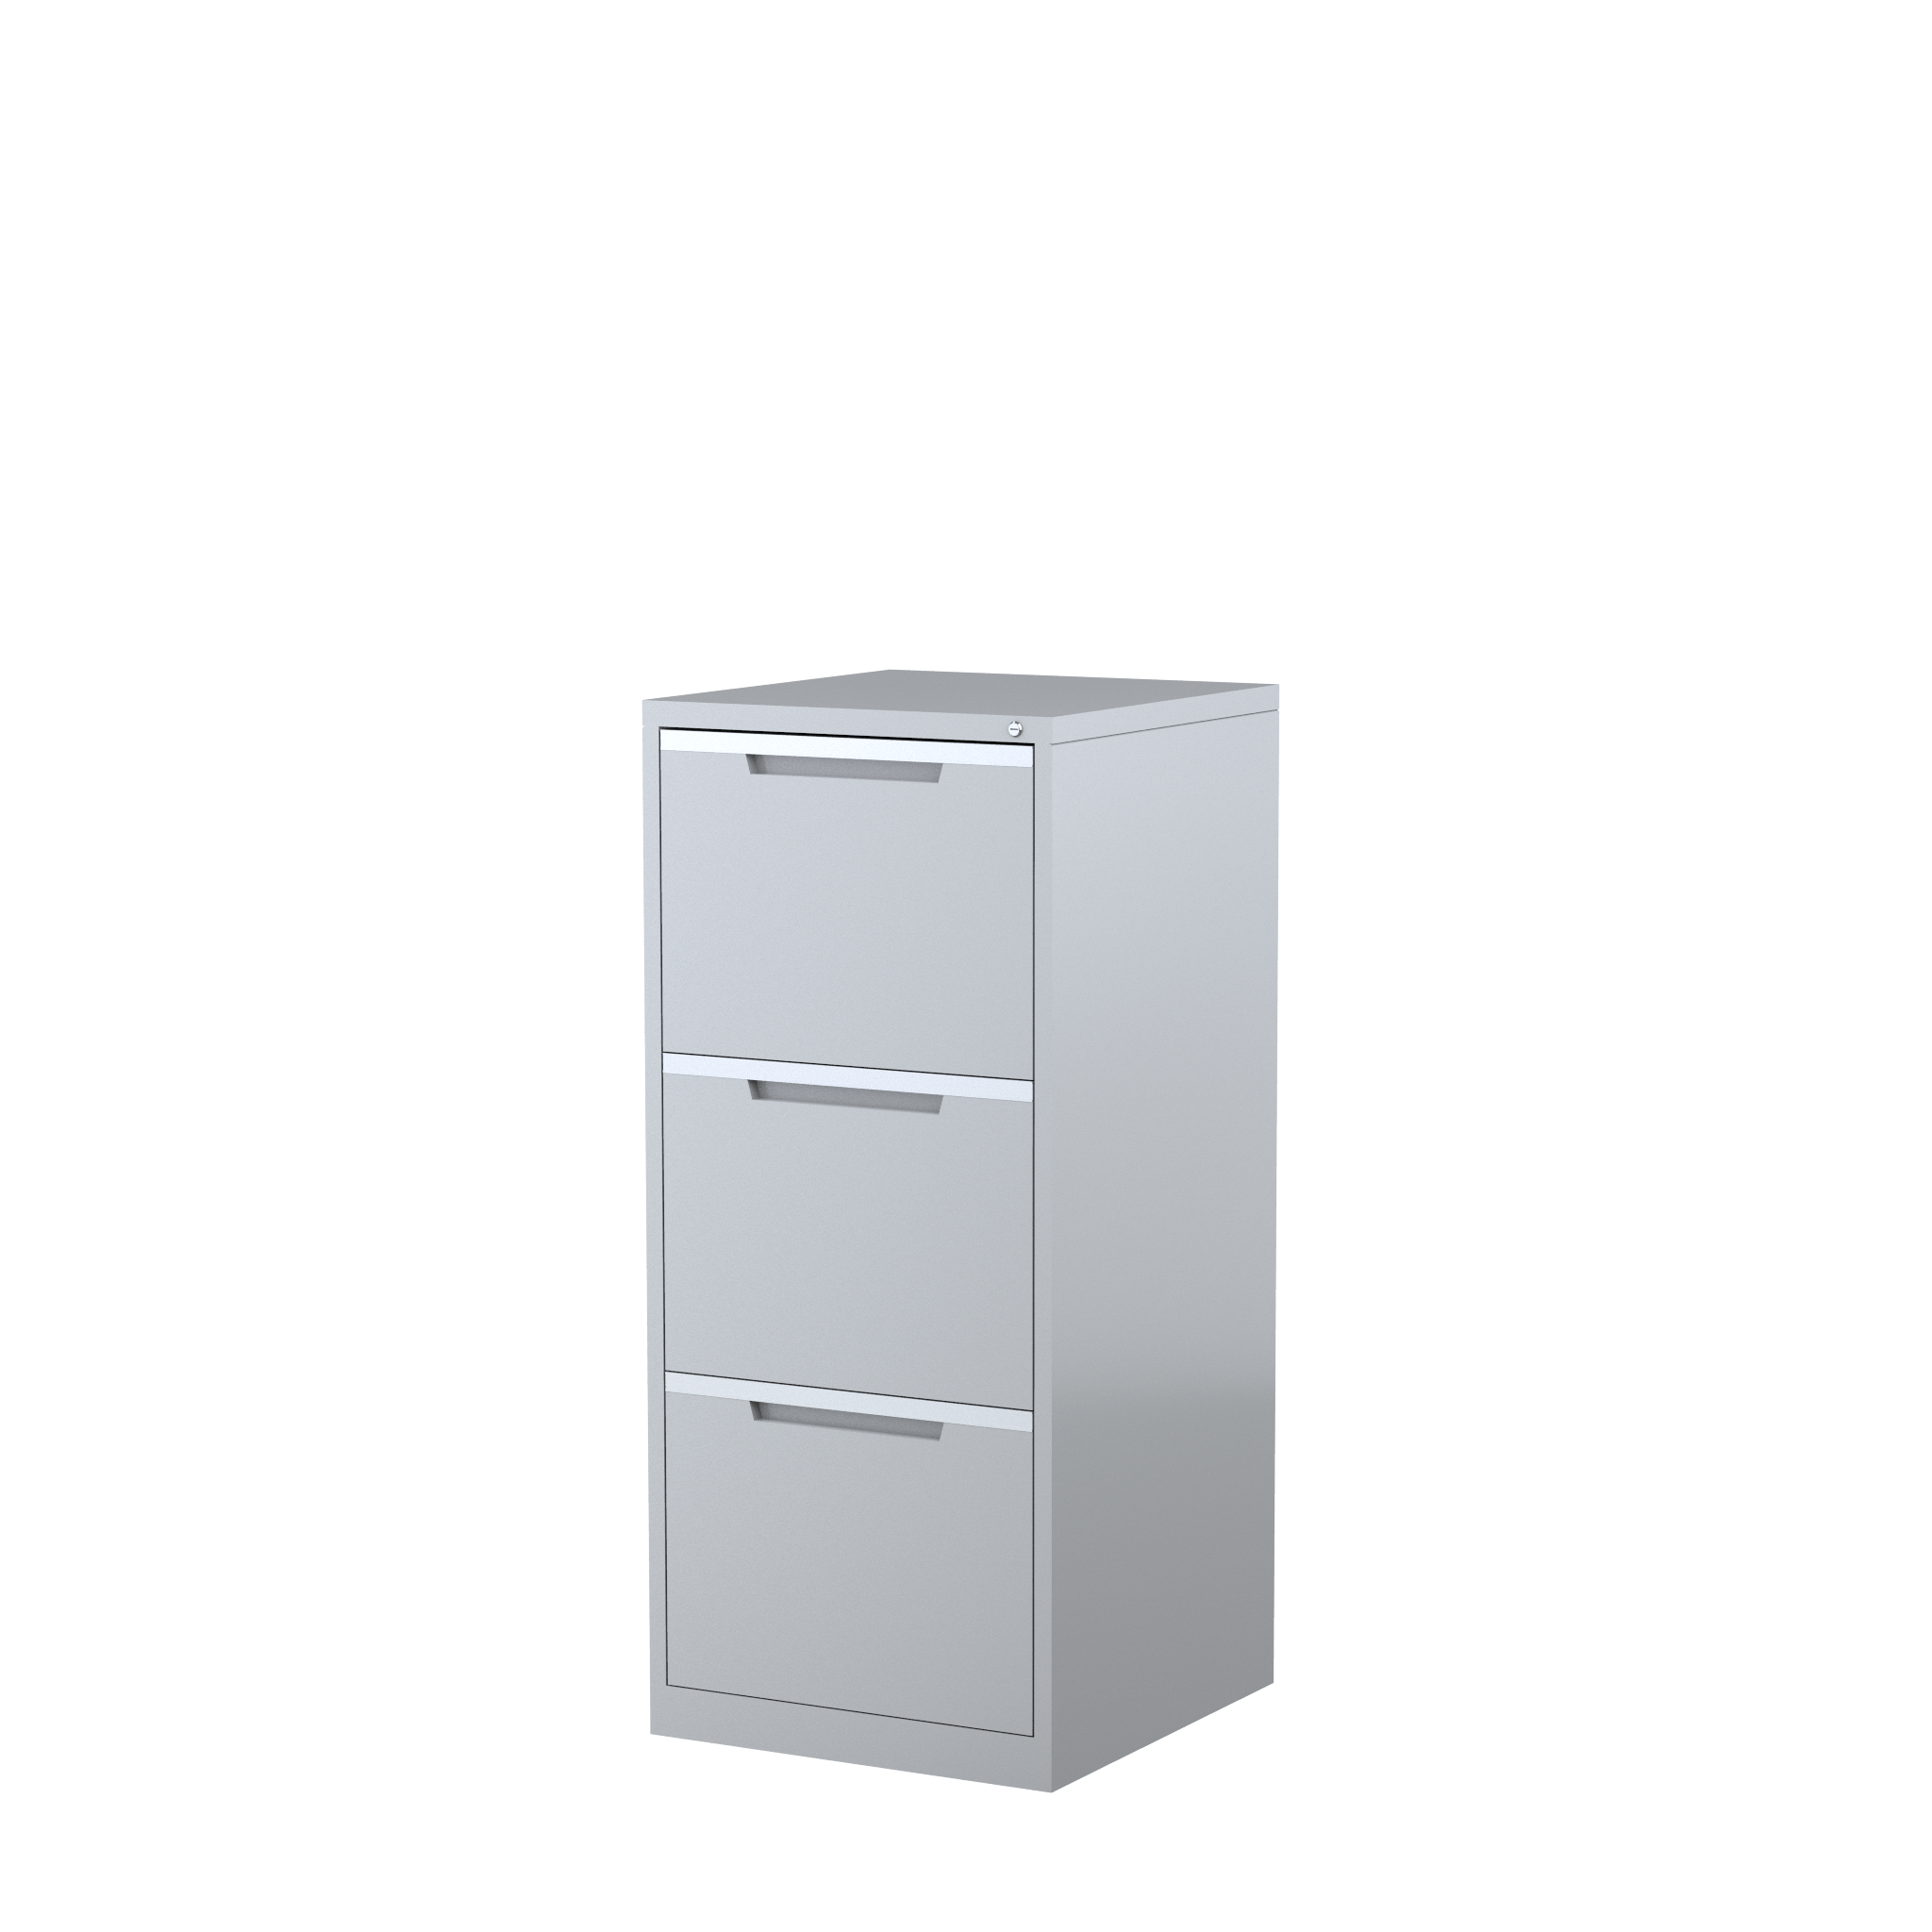 A3 - 3 Drawer Vertical Filing Cabinet - Silver Grey, 3 Drawer